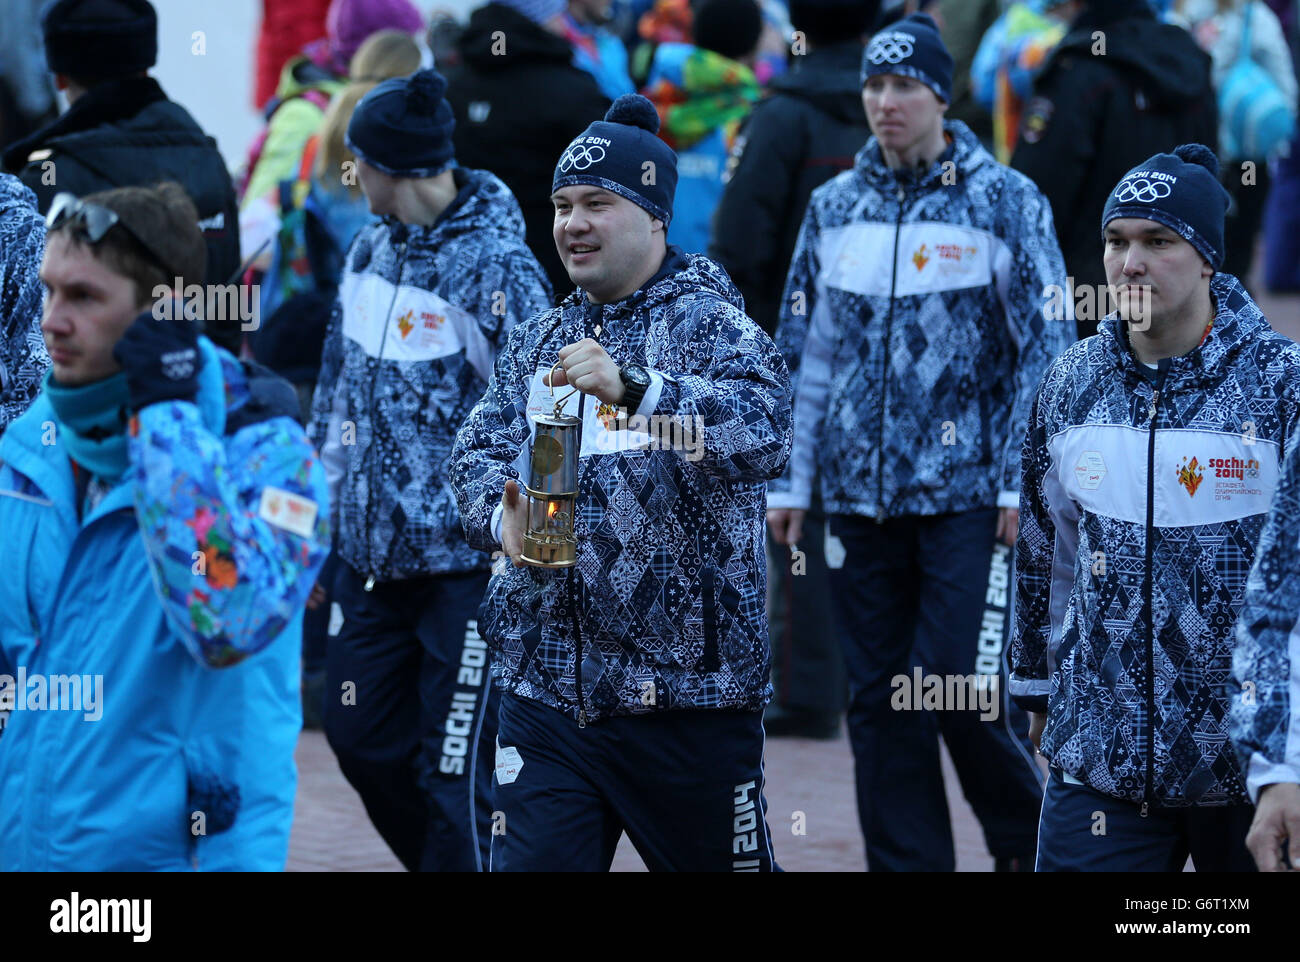 Sochi Winter Olympic Games - Pre-Games activity - Wednesday. The Olympic flame is carried through Rosa Khutor ahead of the start of 2014 Winter Games in Sochi. Stock Photo